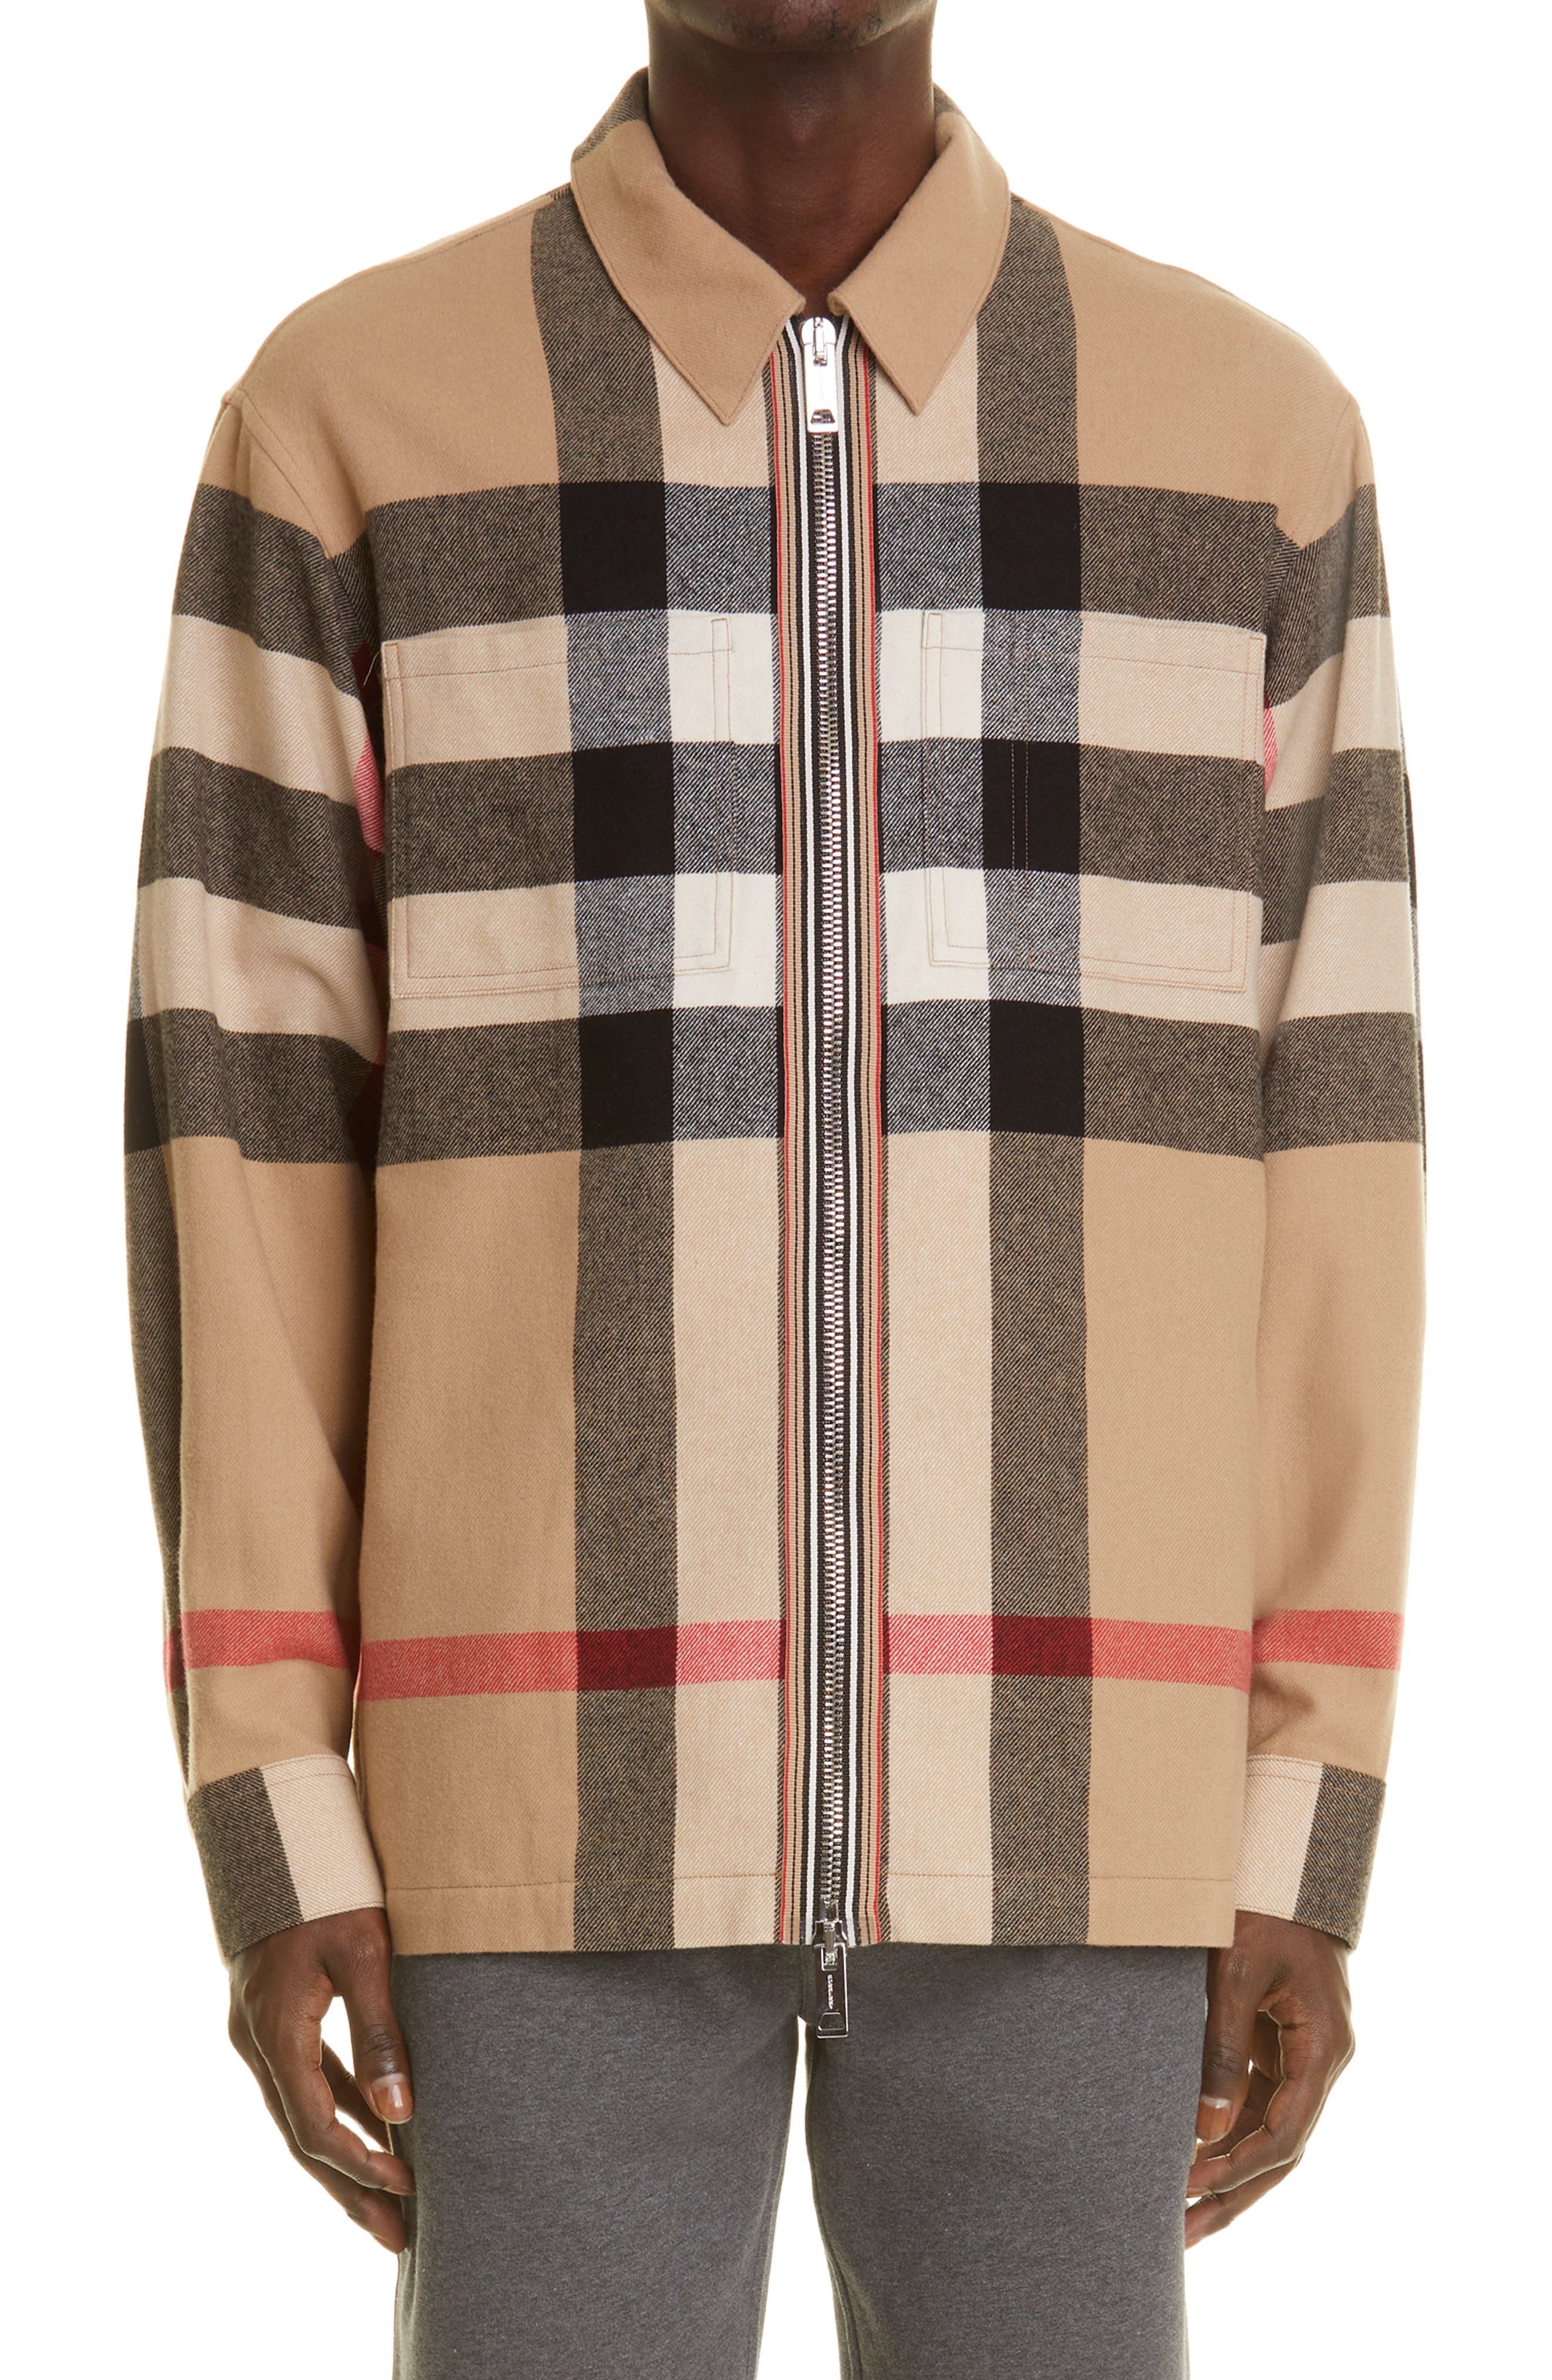 Burberry Hague Archieve Check Zip Front Cotton Flannel Shirt Jacket in Archive Beige Ip Chk at Nordstrom, Size X-Large